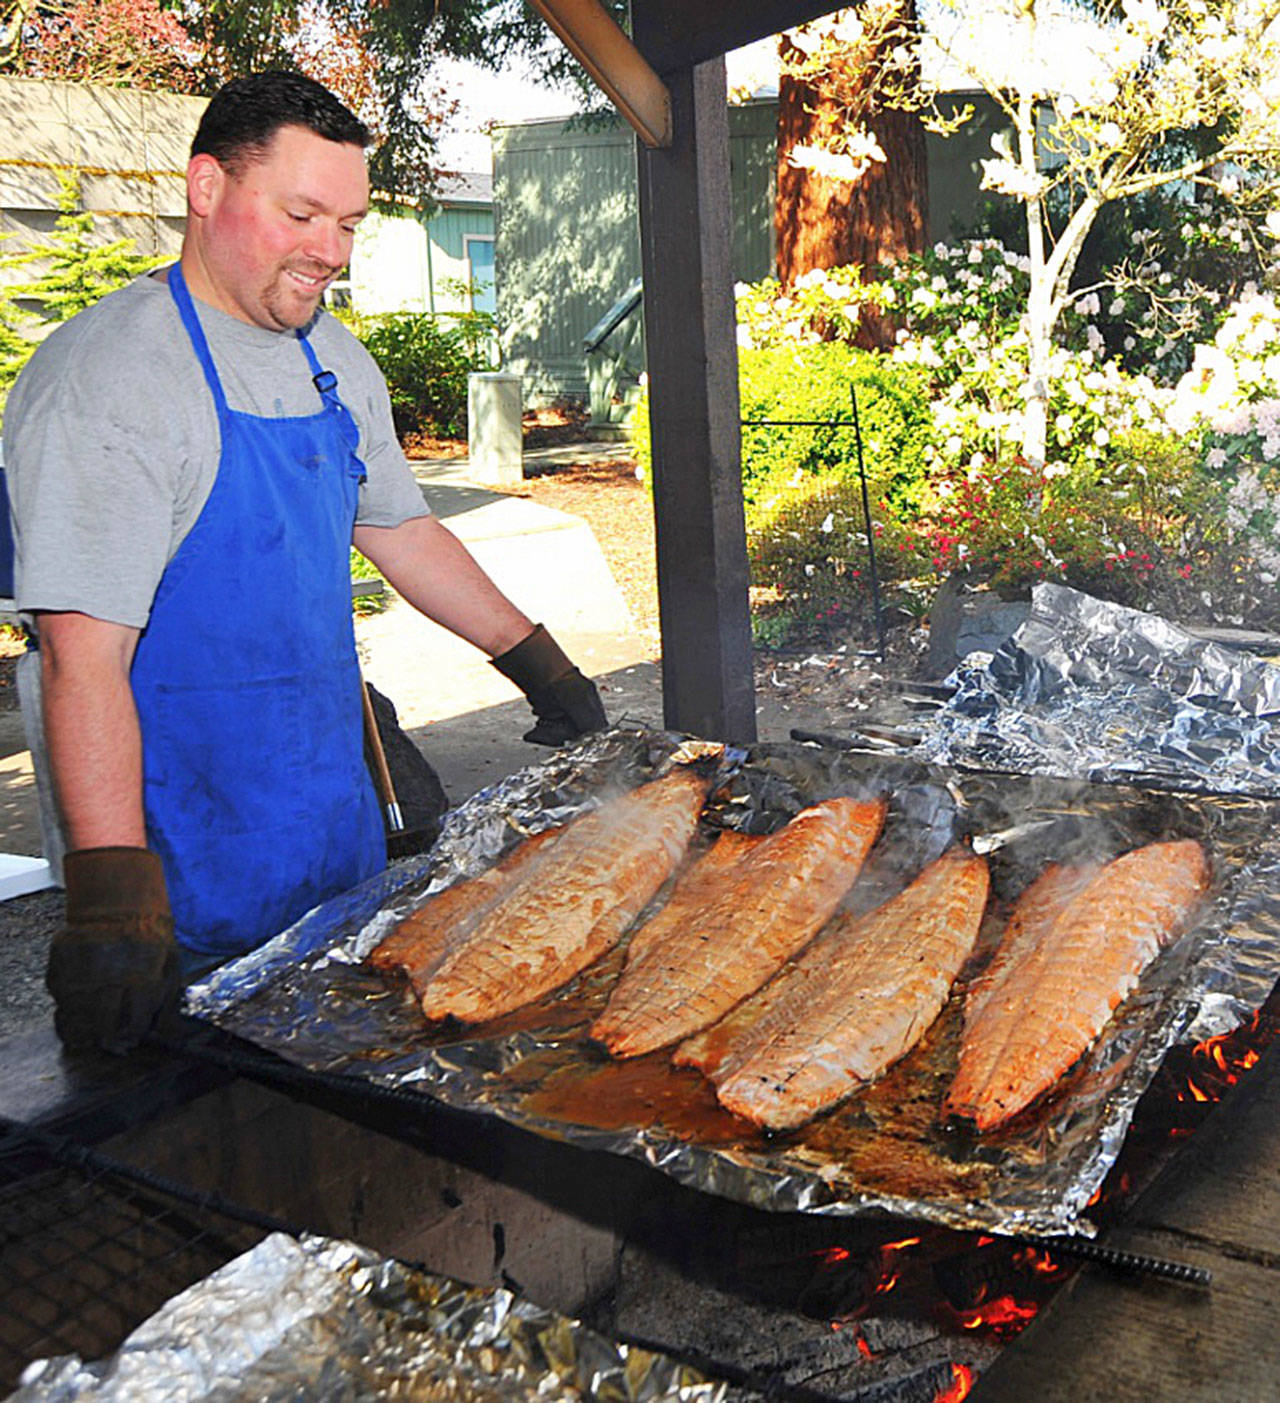 A Rotary Club member prepares wild salmon for guests. (Rotary Club of Sequim)